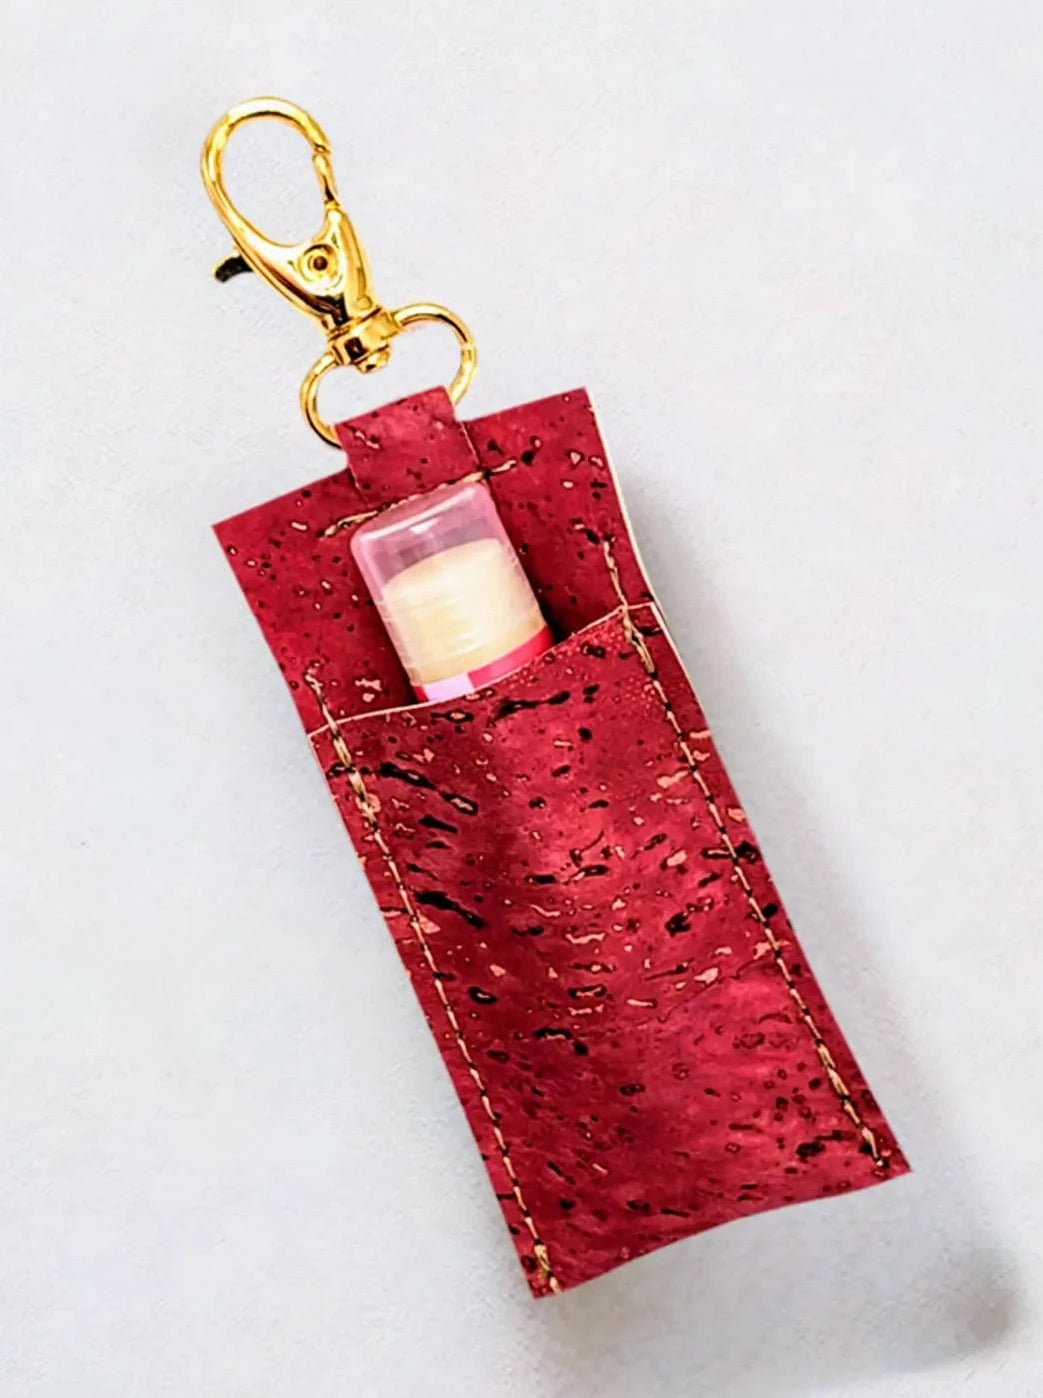 Red Lip balm holder with gold color  keyclip